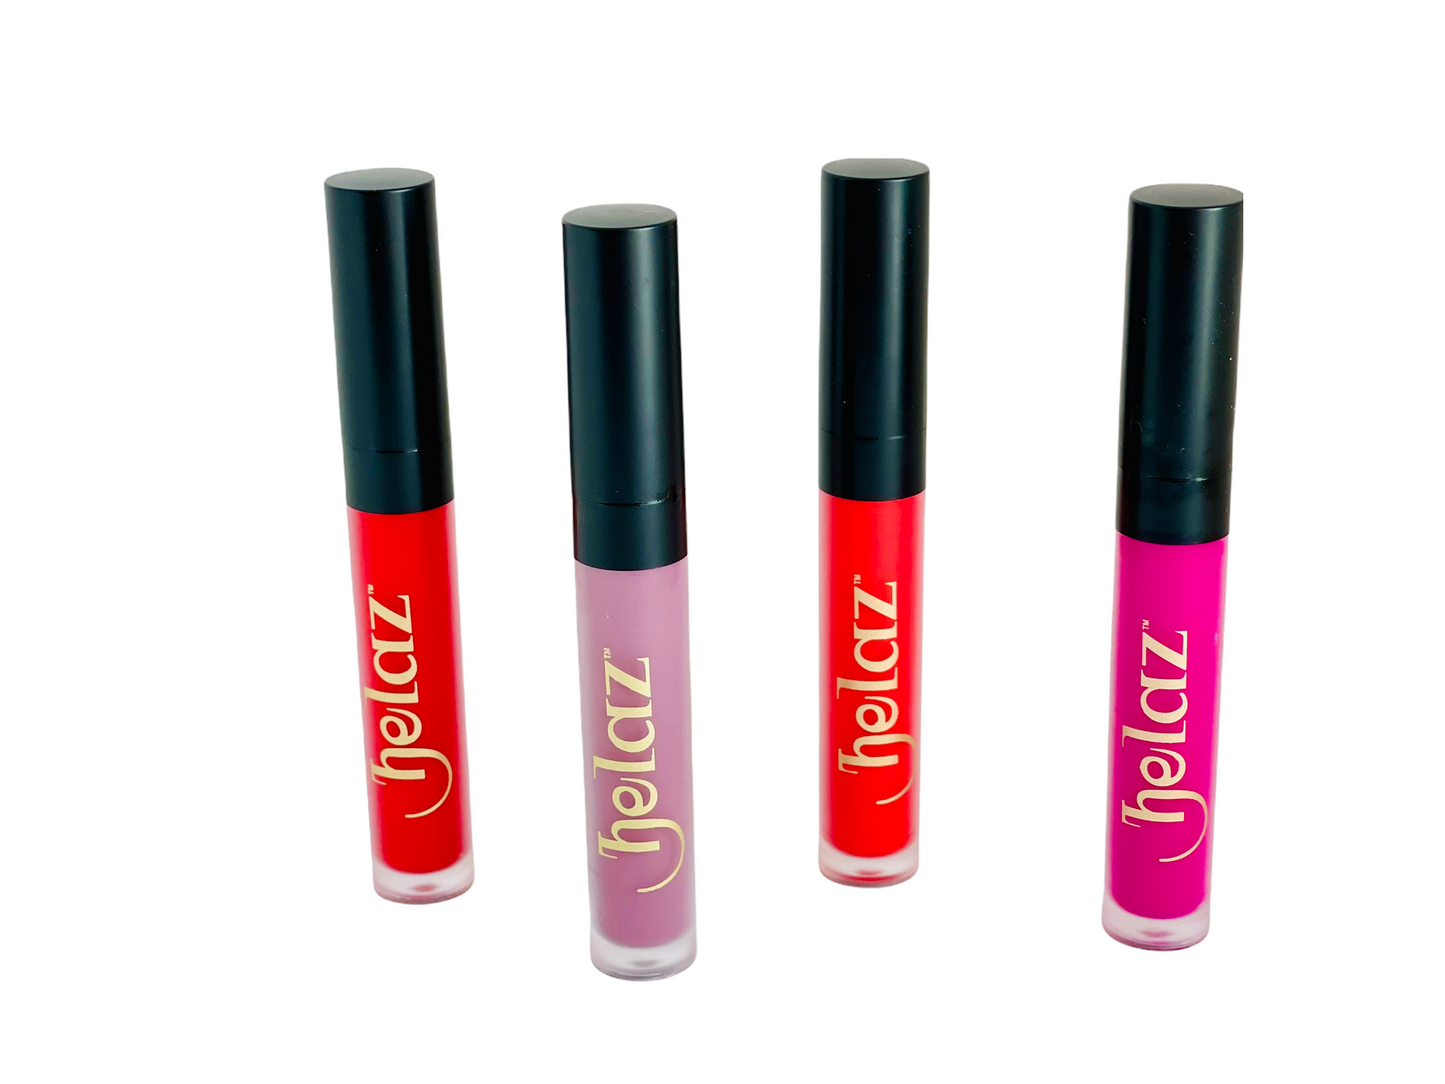 Nigist Matte Liquid Lipstick similar to Lielt from our Tesfa Collection